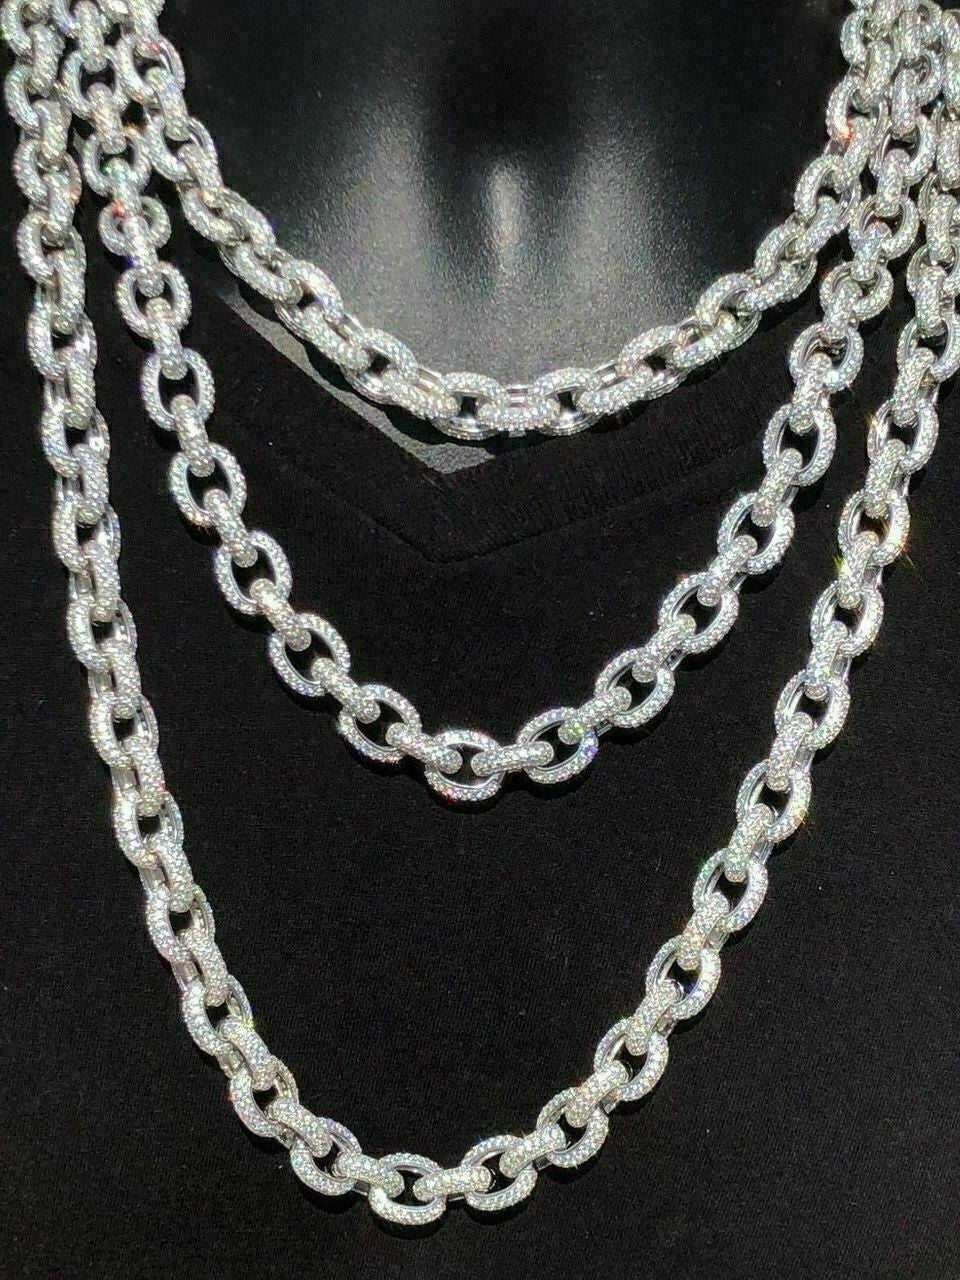 Blecher Rolo Link Chain 12mm White Gold Icy Moissanite Necklace